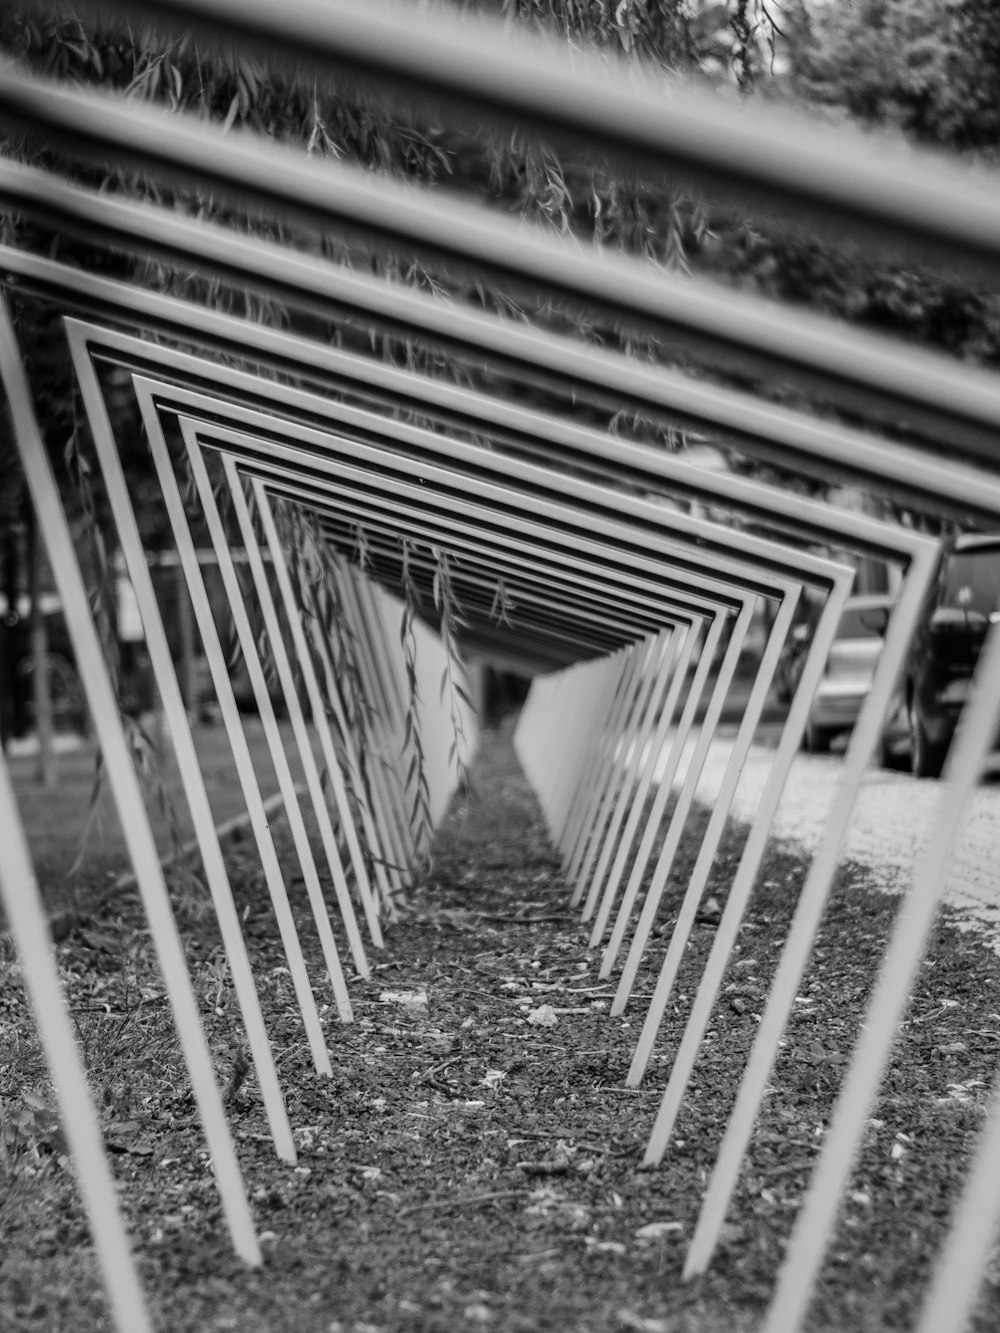 a black and white photo of a row of umbrellas